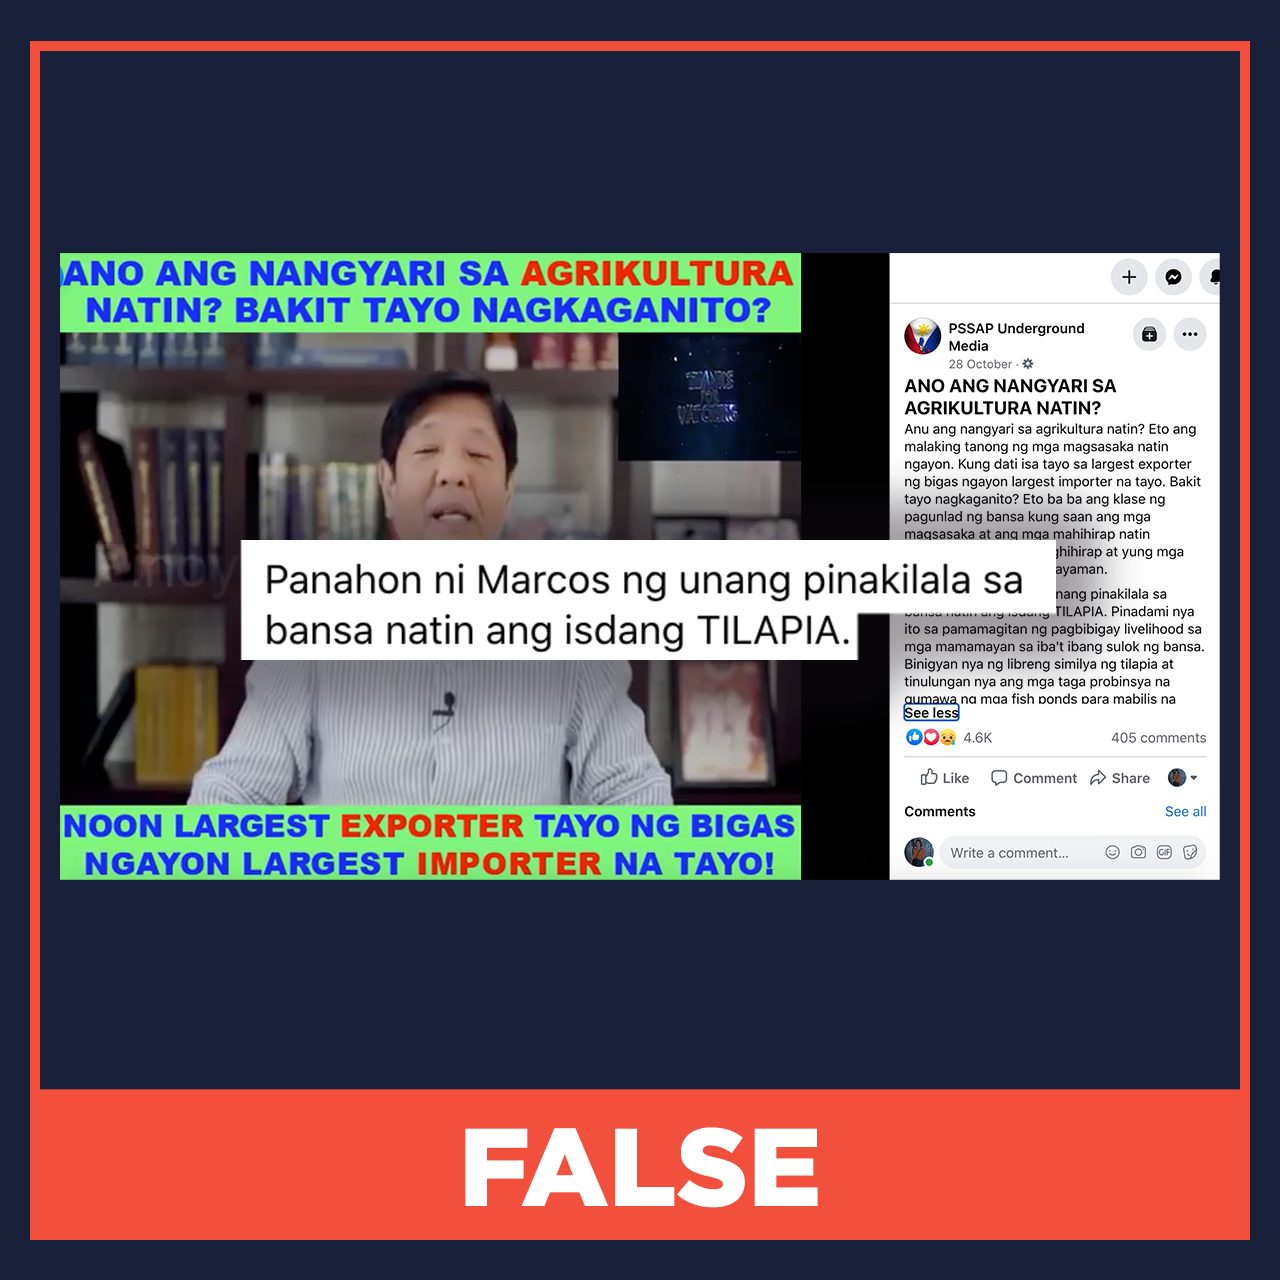 FALSE: Tilapia was introduced to Philippines during Marcos presidency